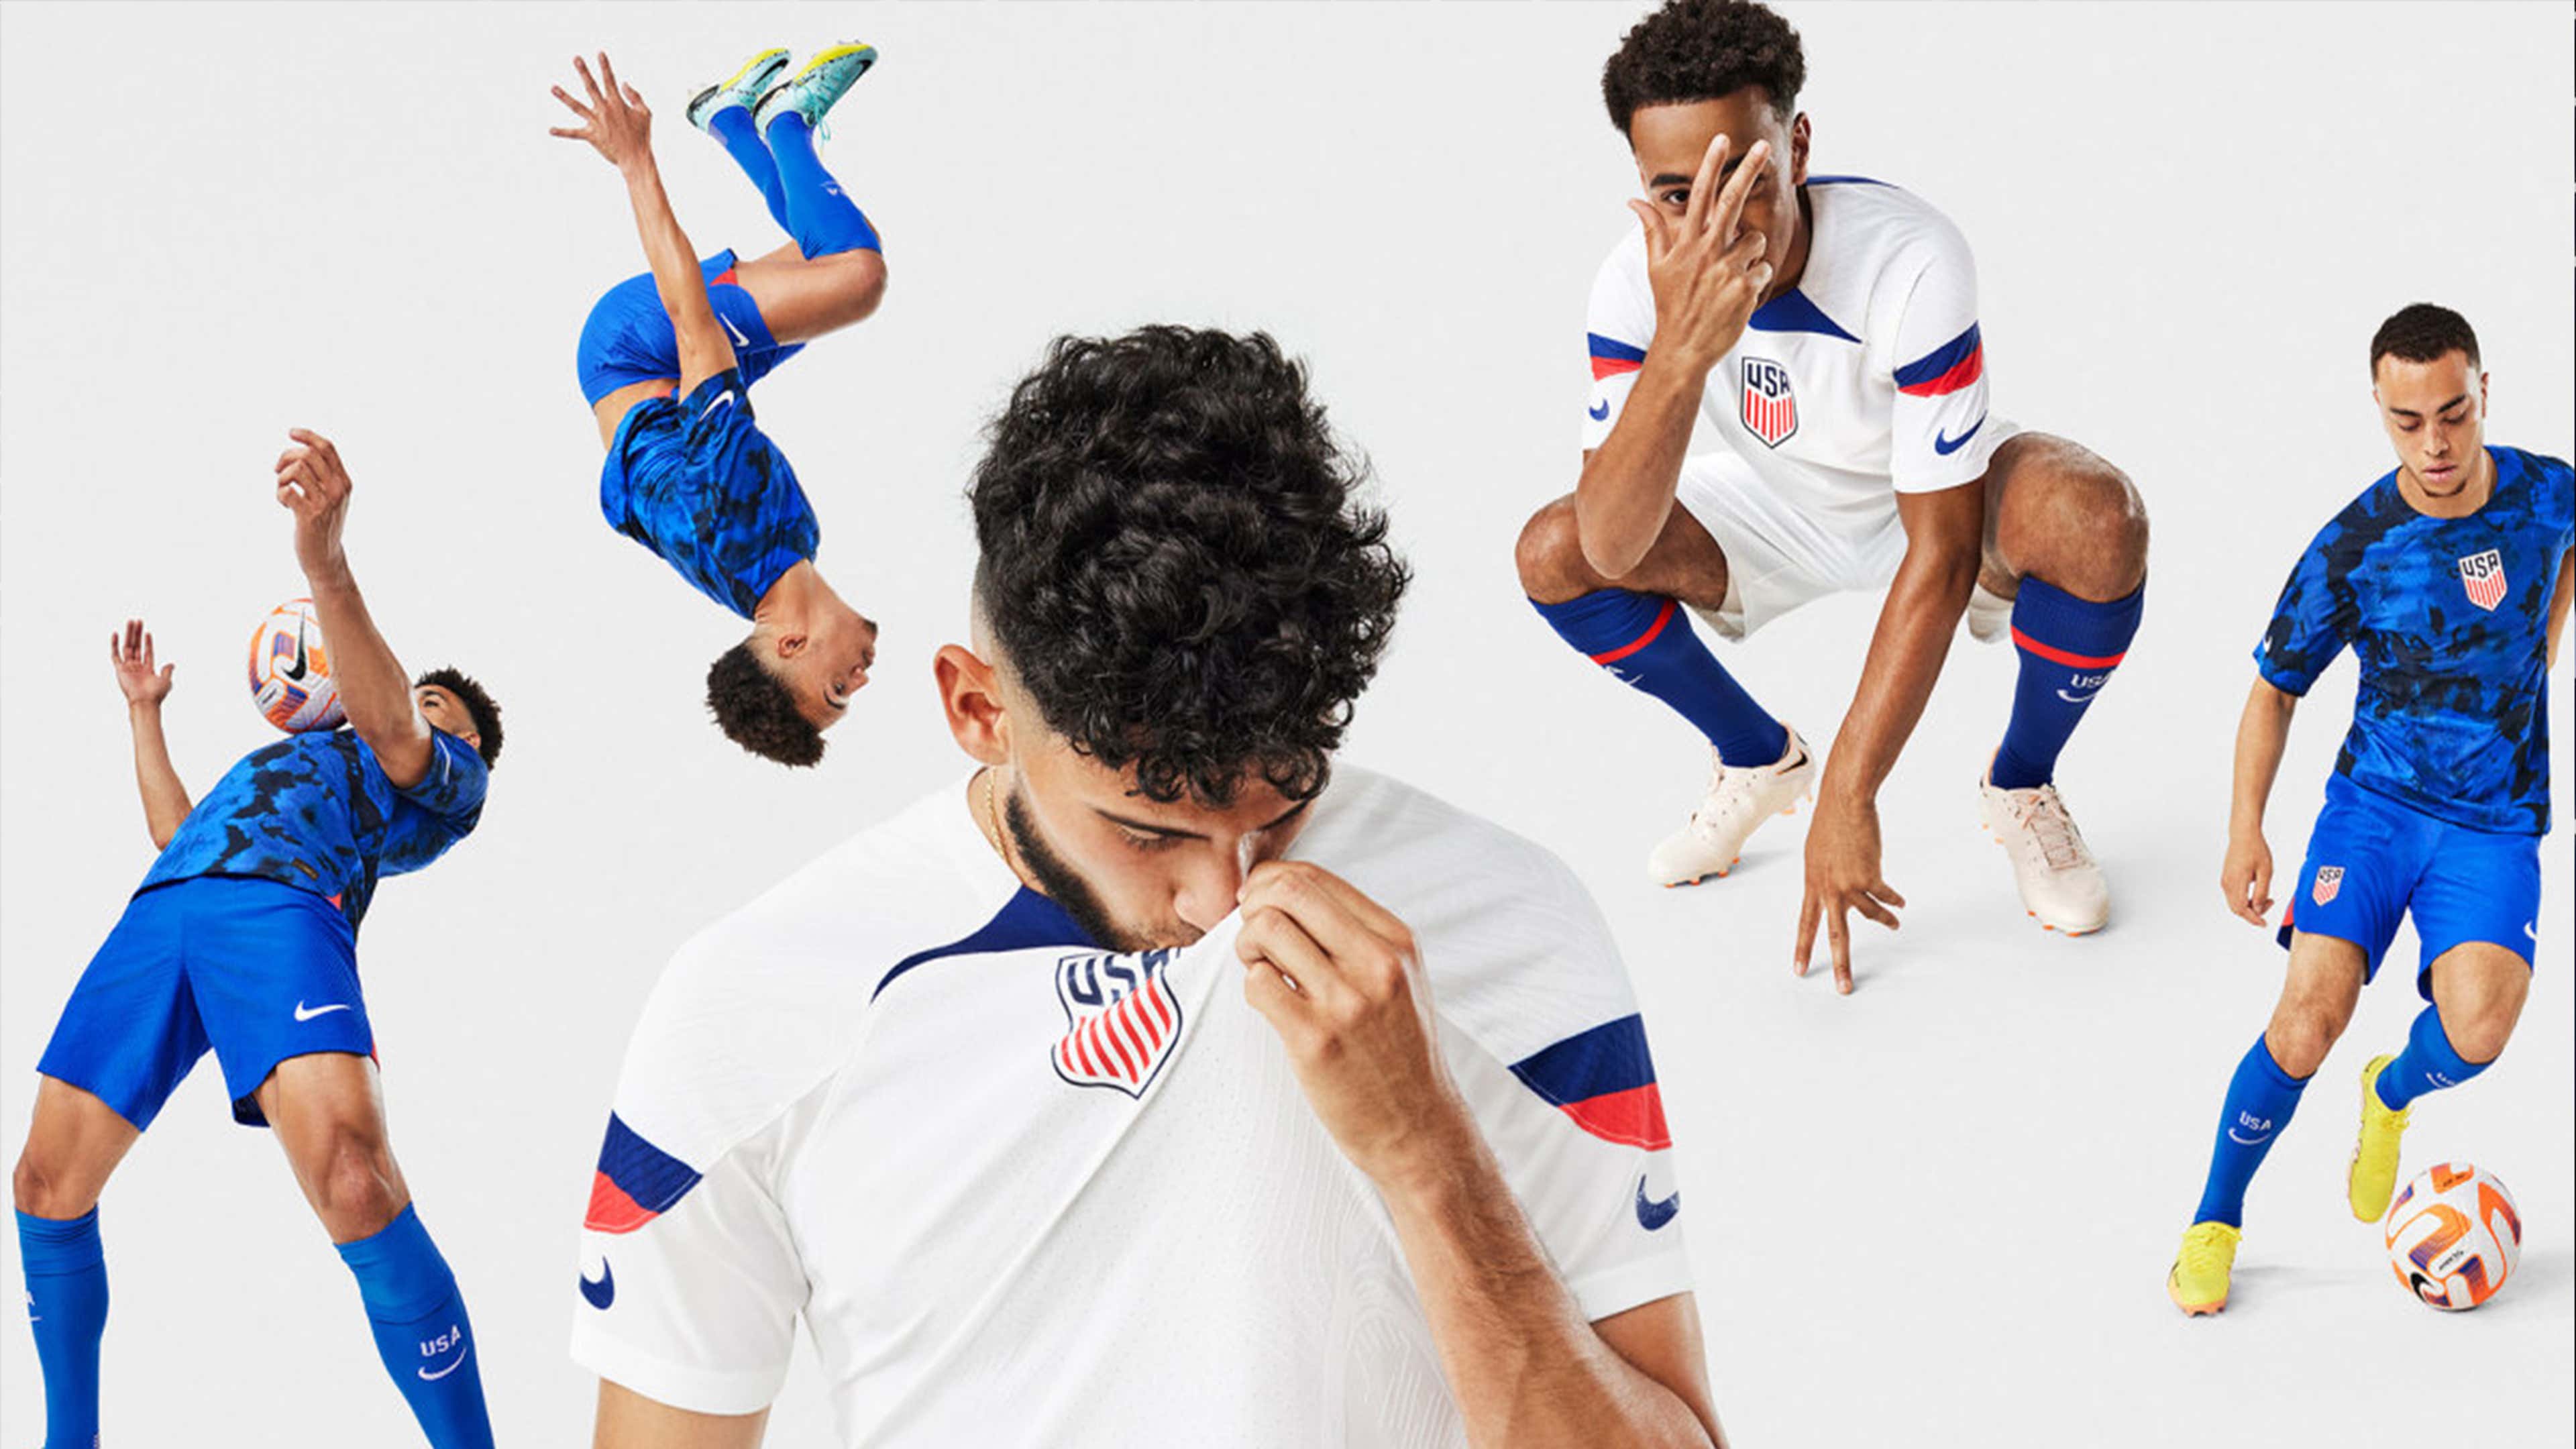 Nike France Authentic Home Jersey World Cup 2022 Men's